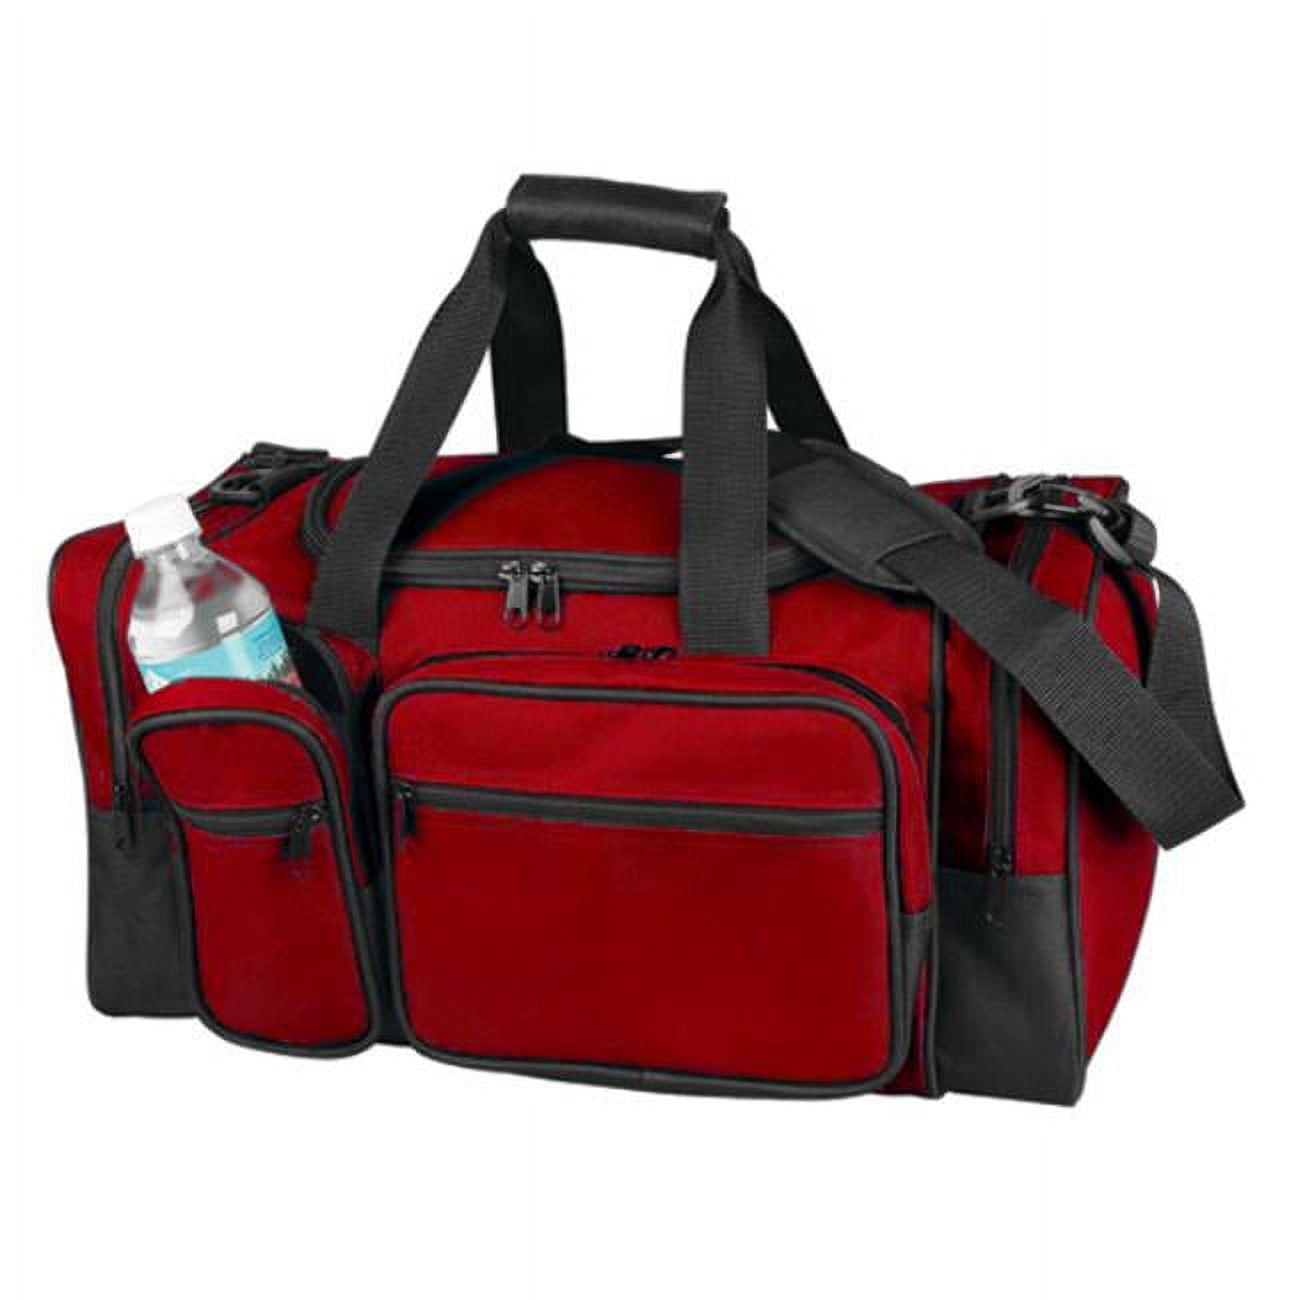 600d Poly Deluxe Club Sorts Duffel Bag - Black & Red, Case Of 12